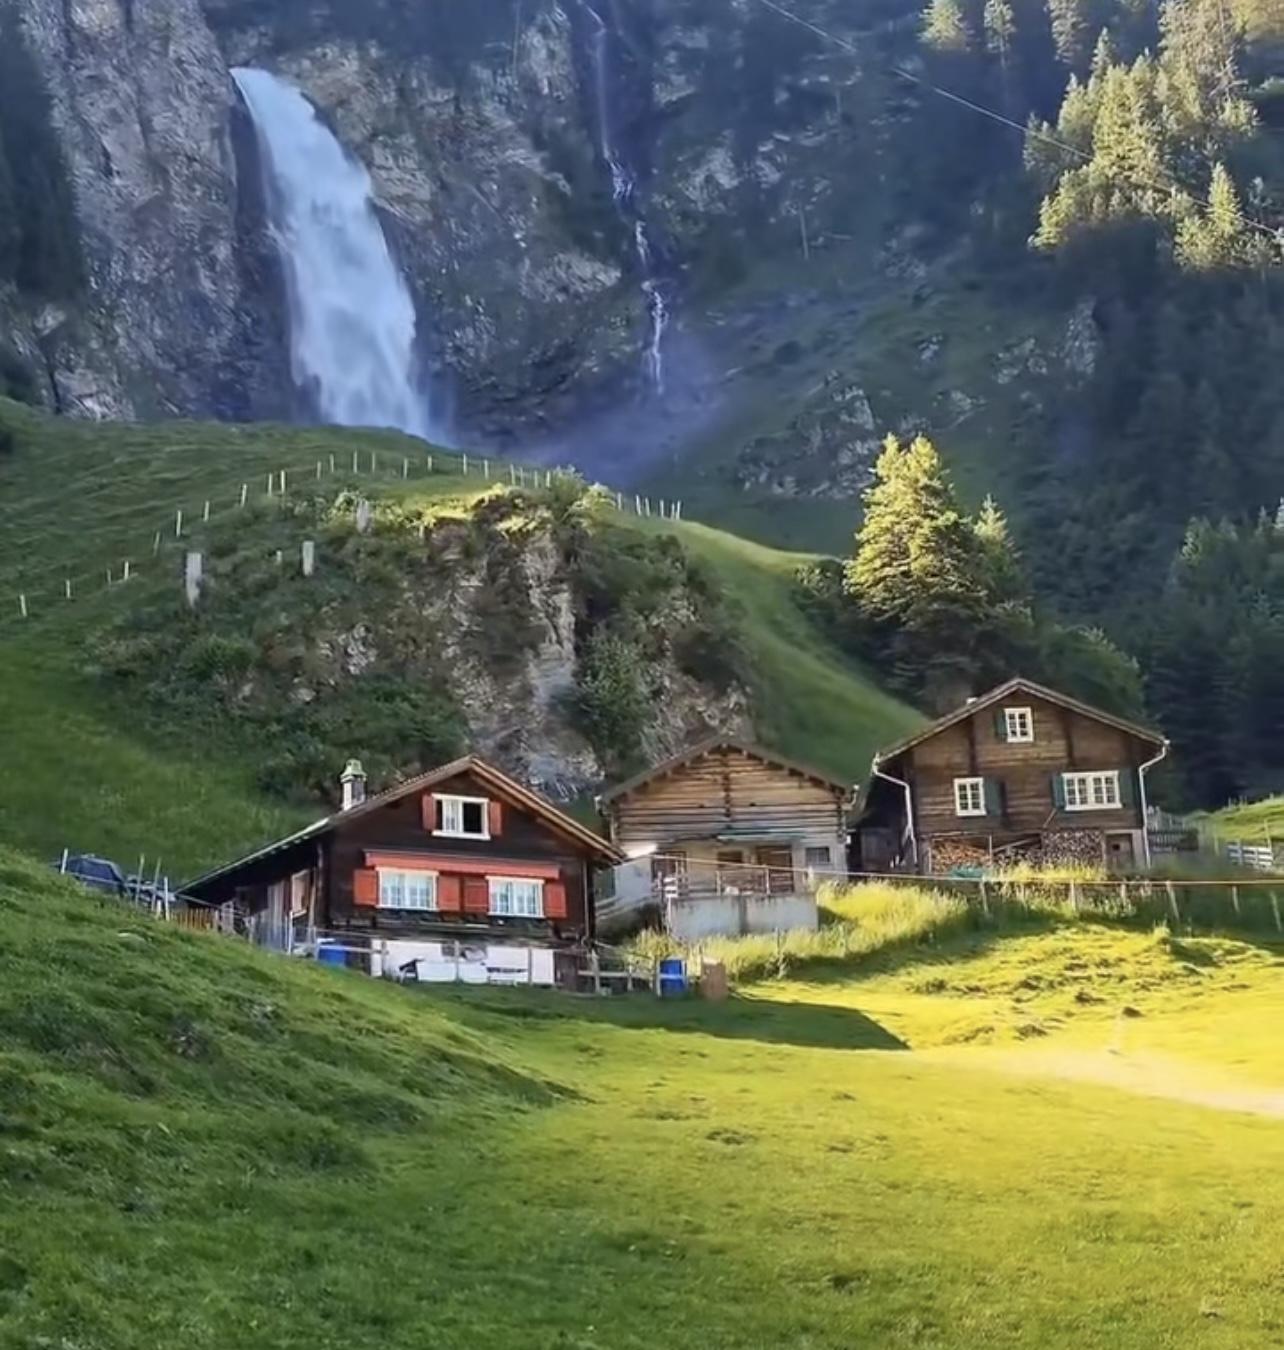 Switzerland in each month of the year